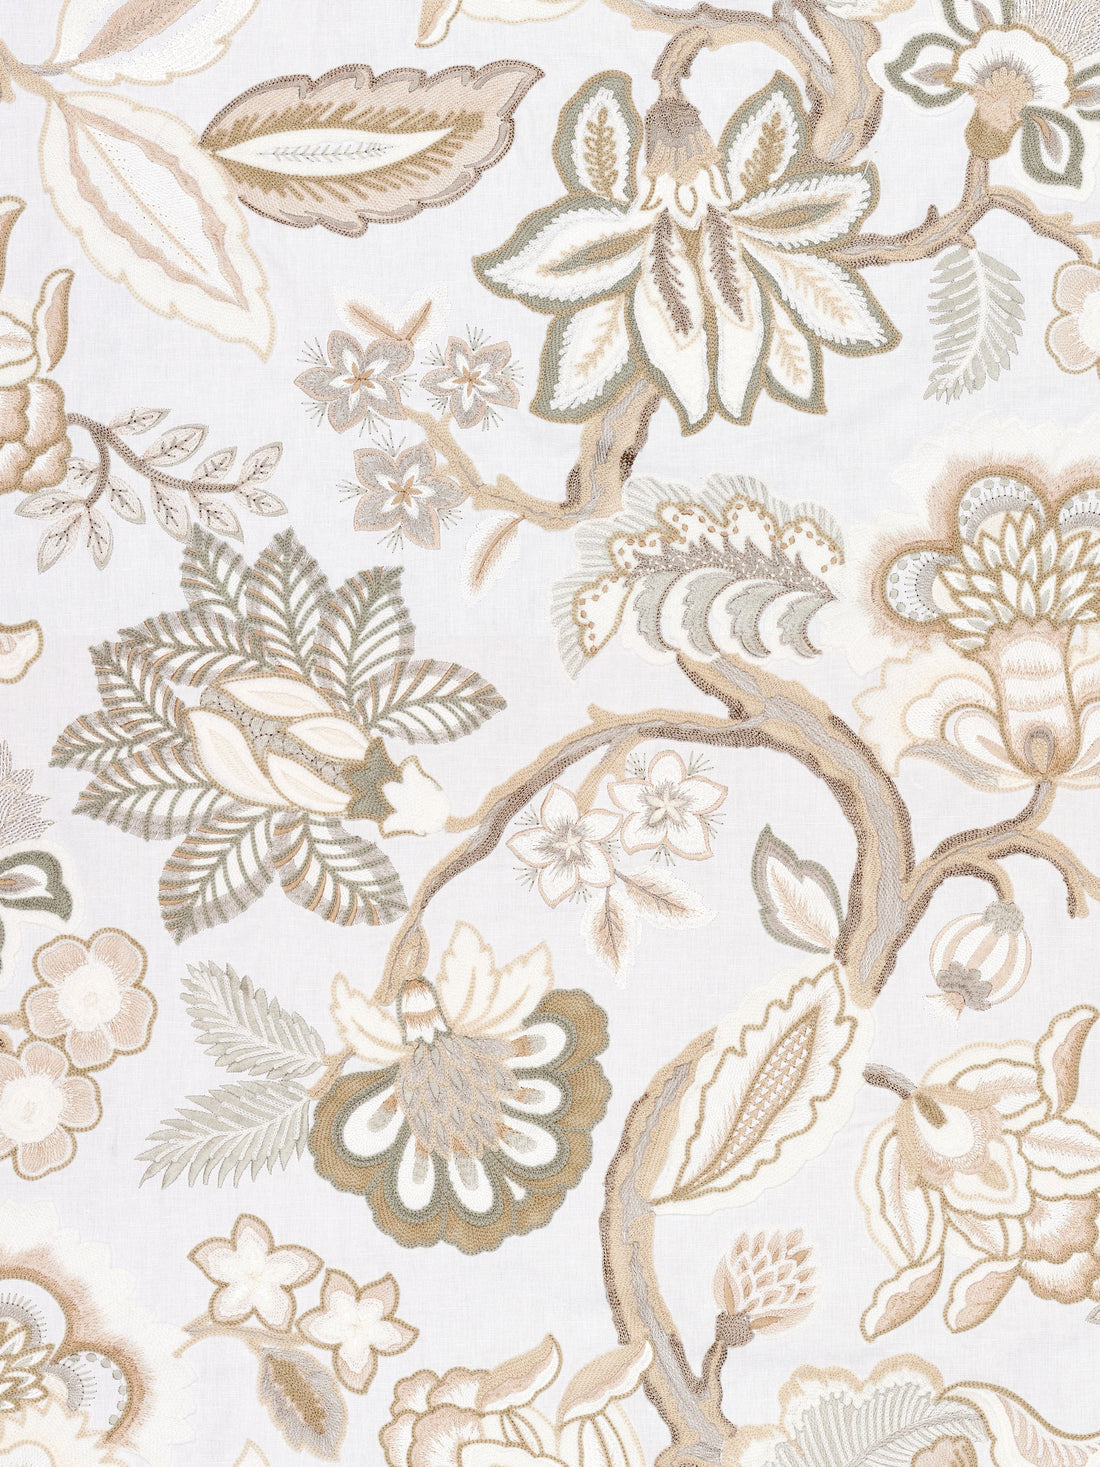 Hillside Crewel fabric in ivory color - pattern number S7 0003HILL - by Scalamandre in the Old World Weavers collection